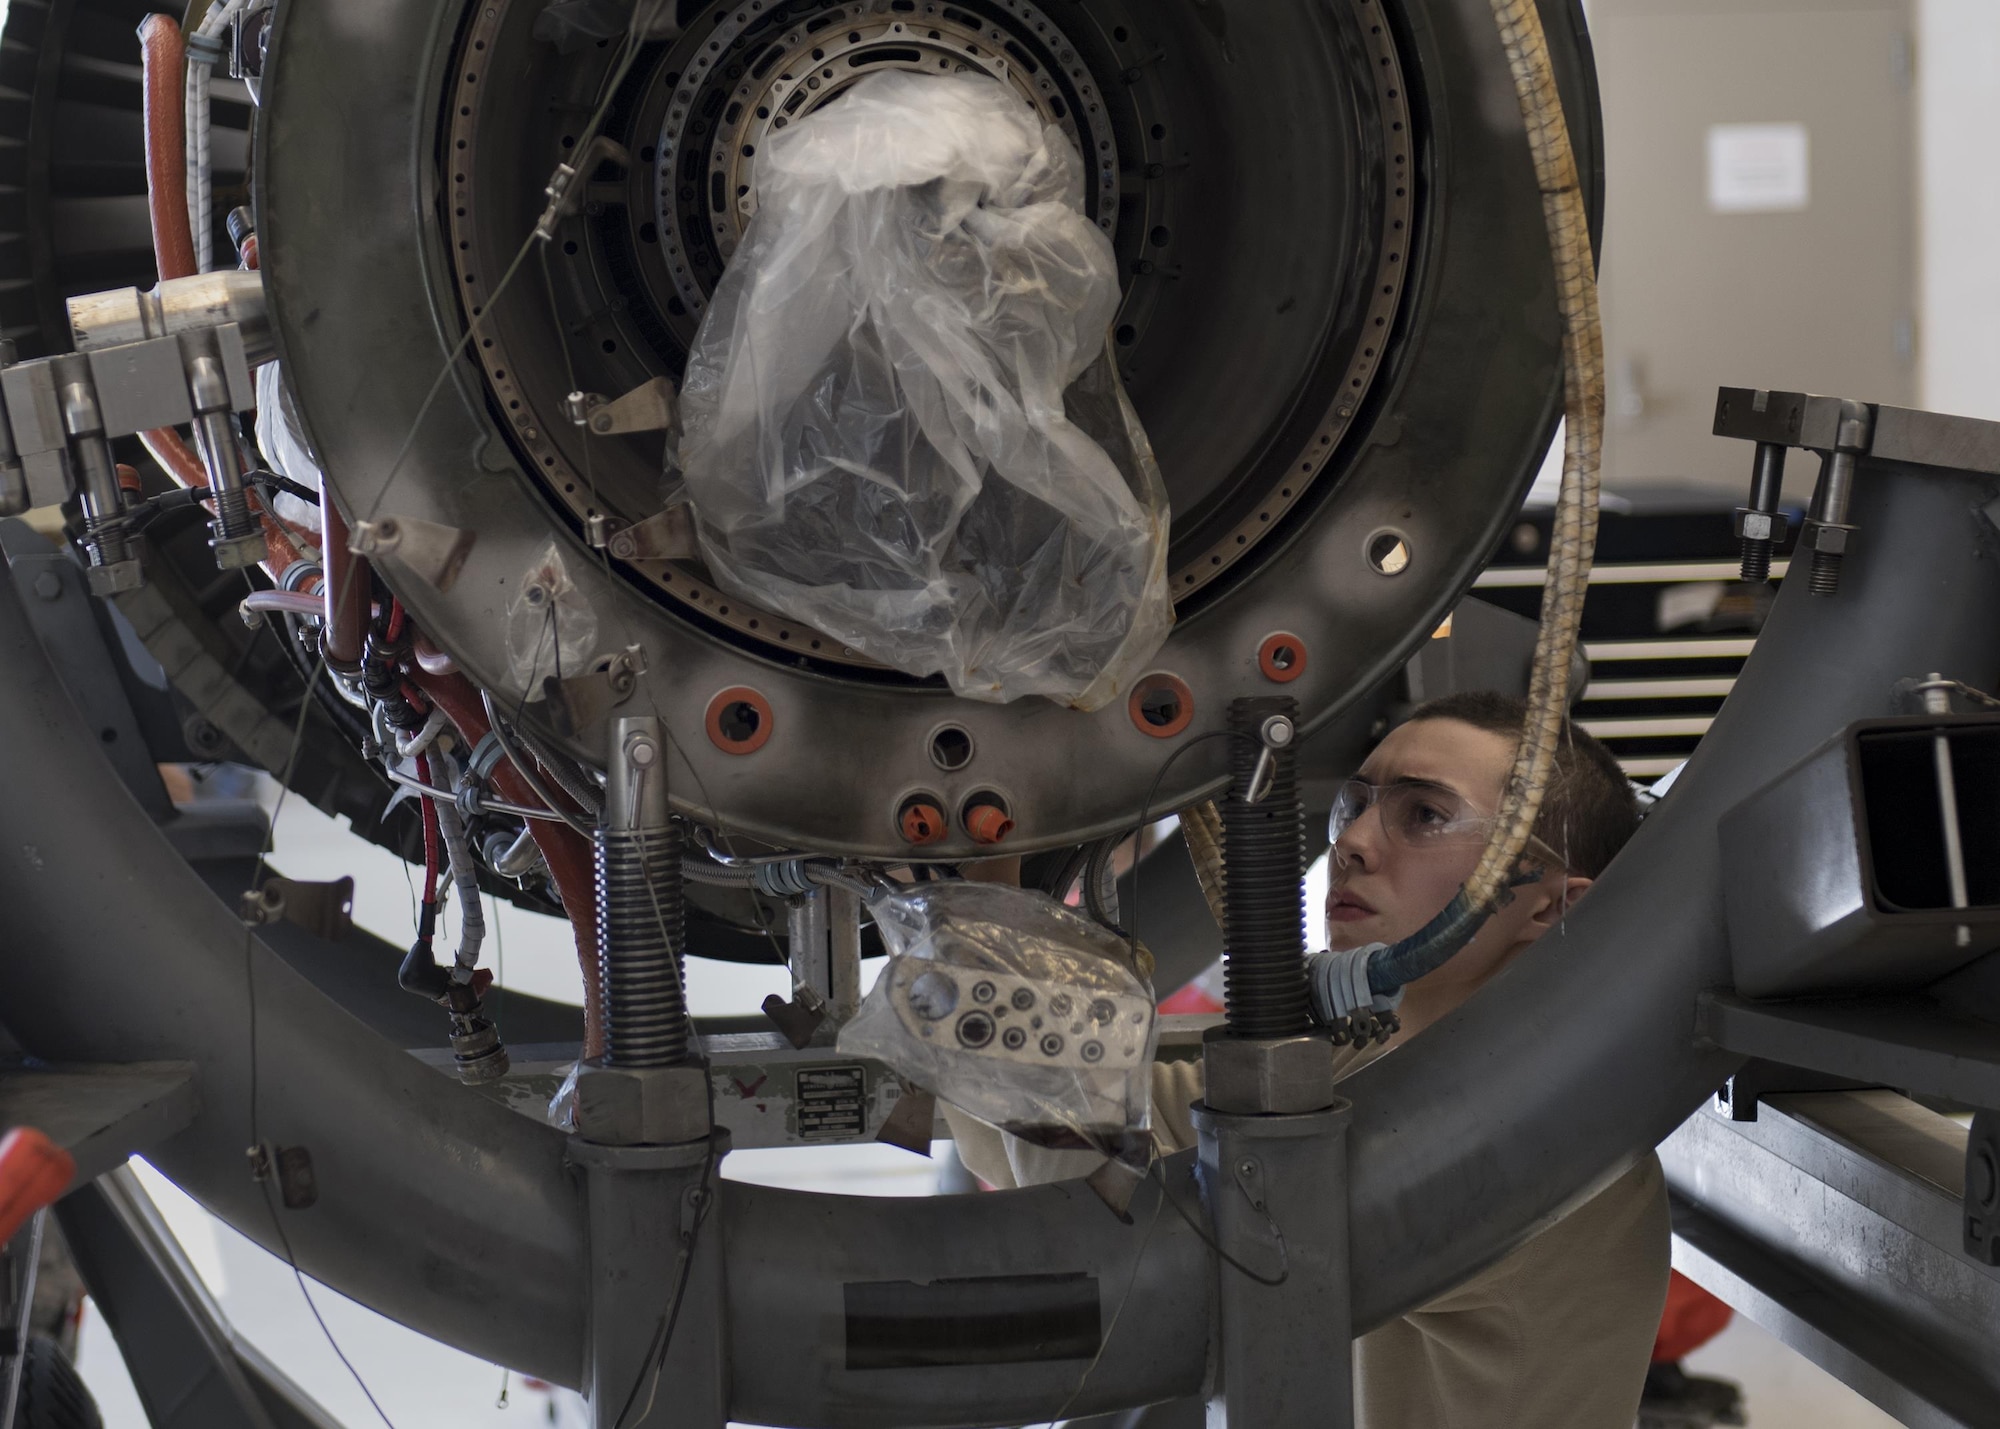 Airman 1st Class Anthony Guevara, 23d Component Maintenance Squadron propulsion technician, reaches into the underside of a TF-34 engine used in A-10C Thunderbolt lls, Jan. 25, 2017, at Moody Air Force Base, Ga. The 23d CMS is currently involved in an event aimed at decreasing the scheduled 28 days it takes to disassemble, repair and reassemble the TF-34 engine. (U.S. Air Force photo by Airman 1st Class Daniel Snider)